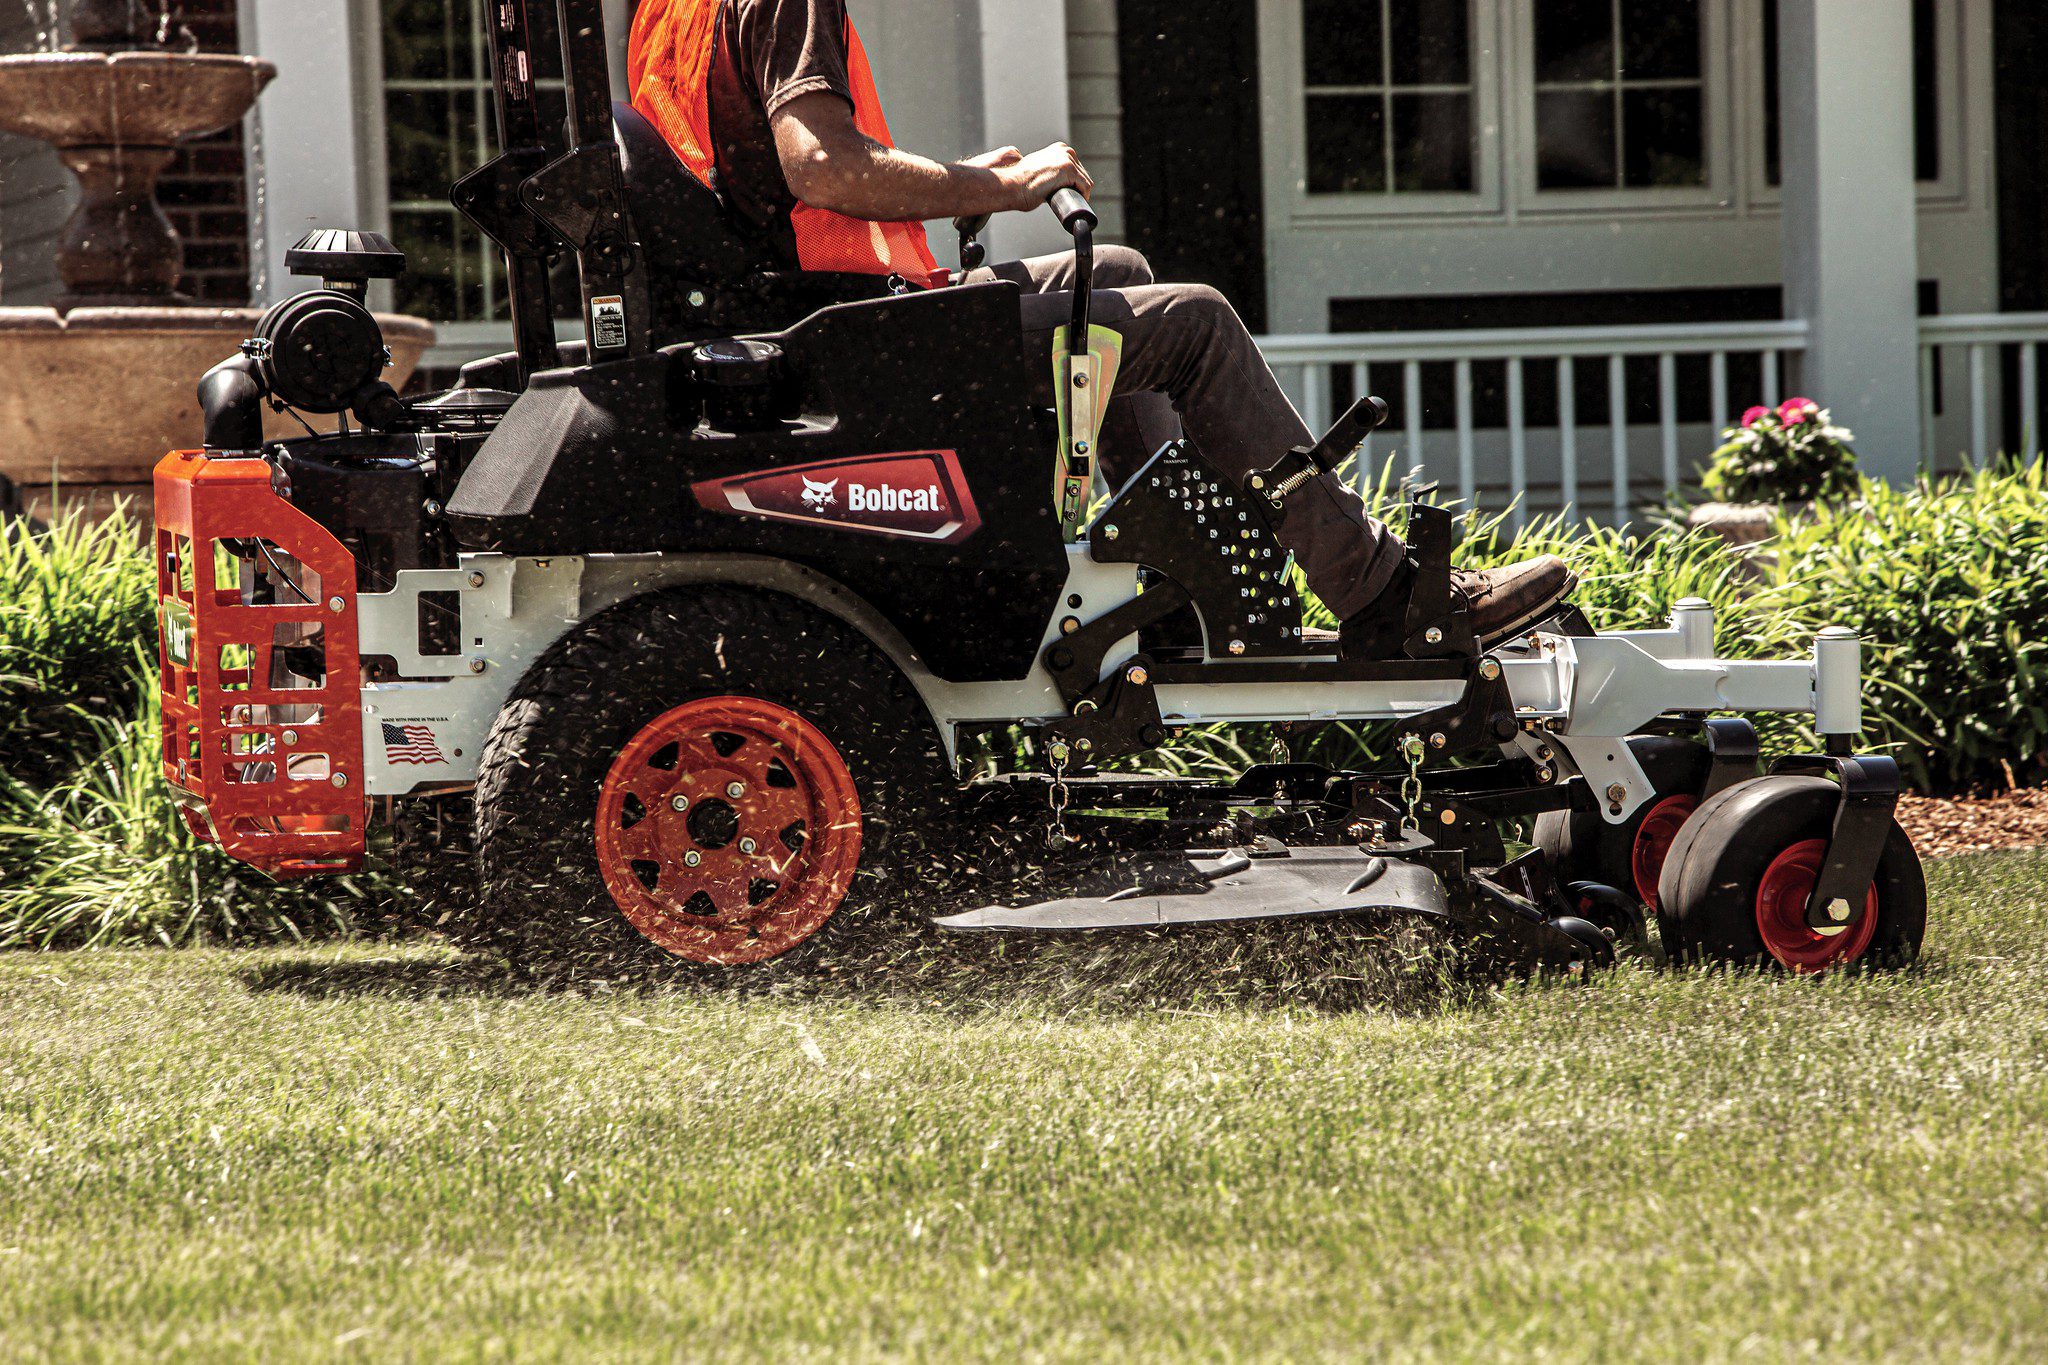 Browse Specs and more for the Bobcat ZT6000 Zero-Turn Mower 61″ - Bobcat of Huntsville